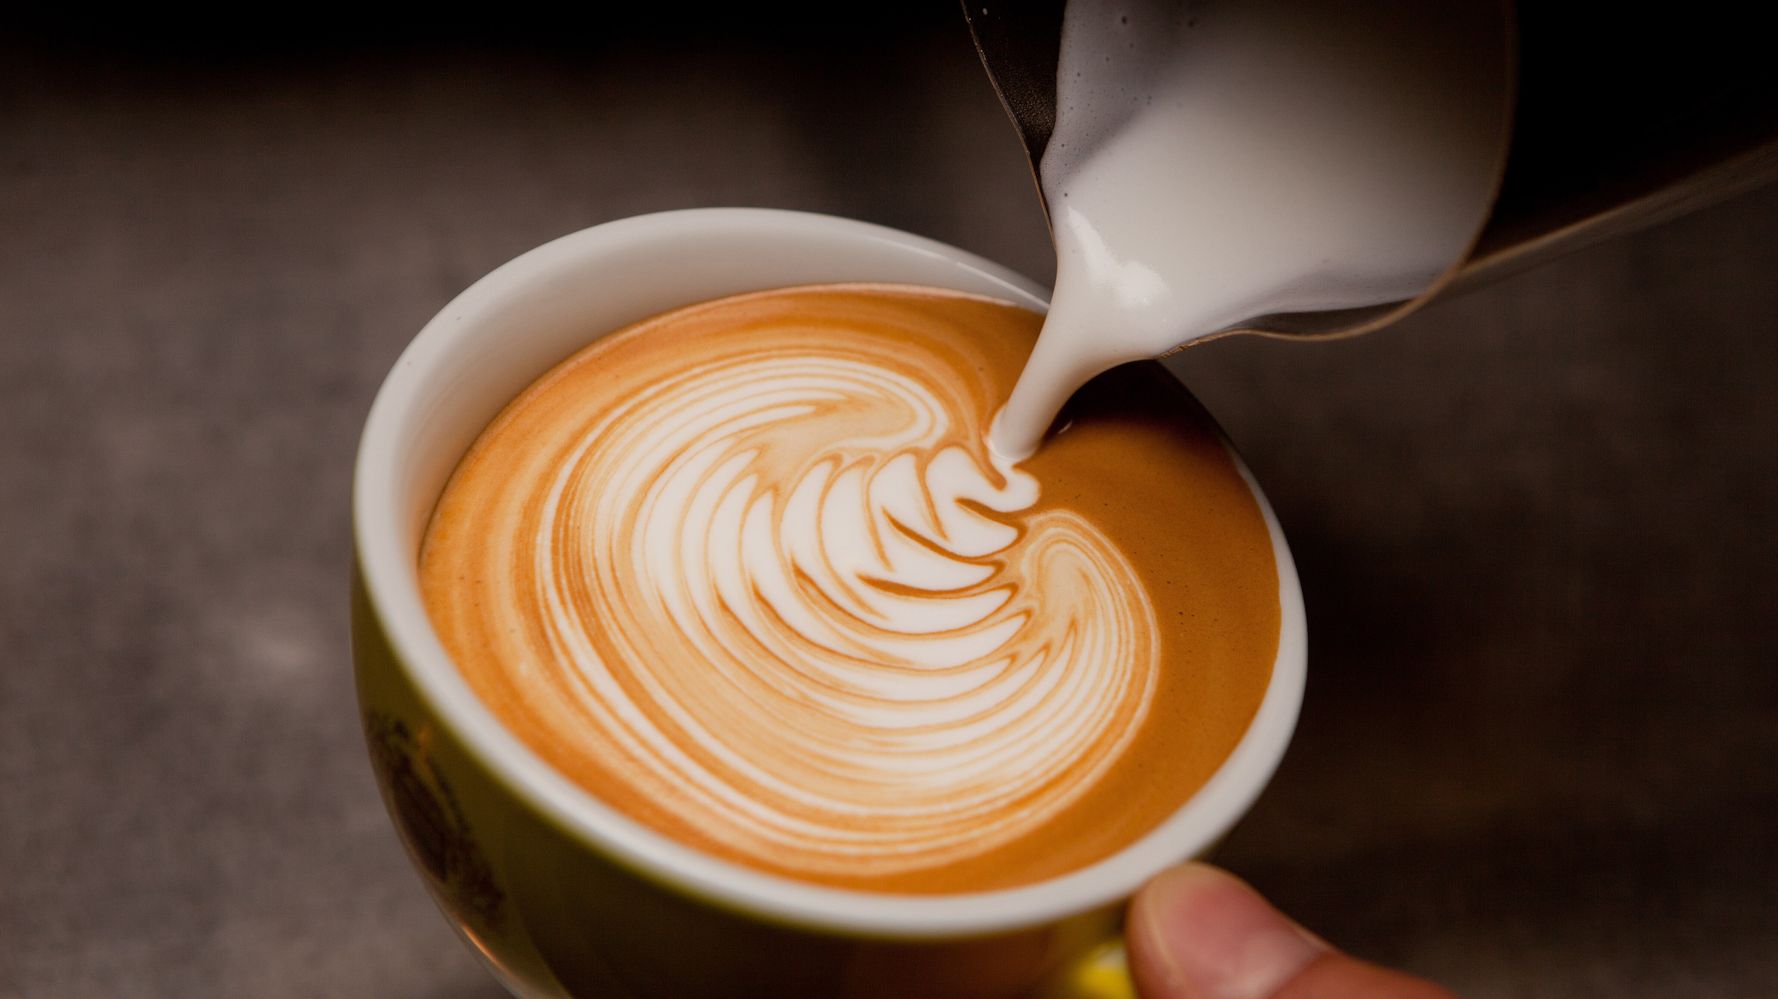 What is Super Milk? More Protein For Extra Creamy Lattes - Bloomberg